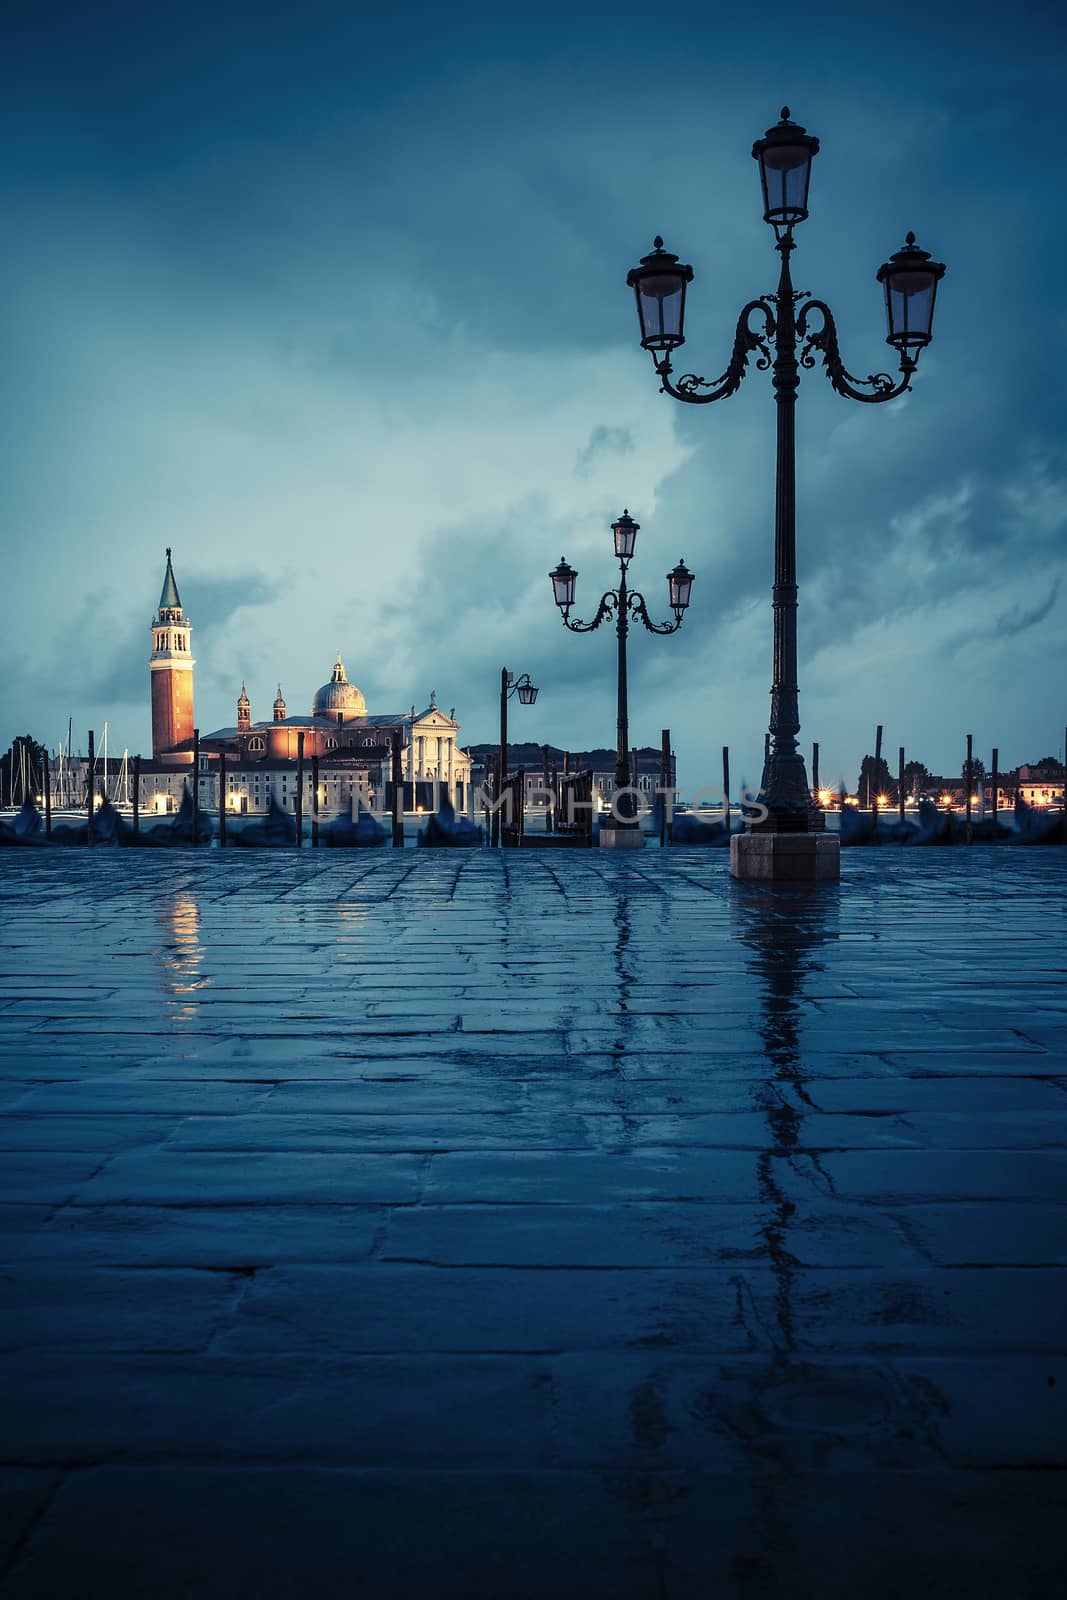 Venice on rainy day by vwalakte